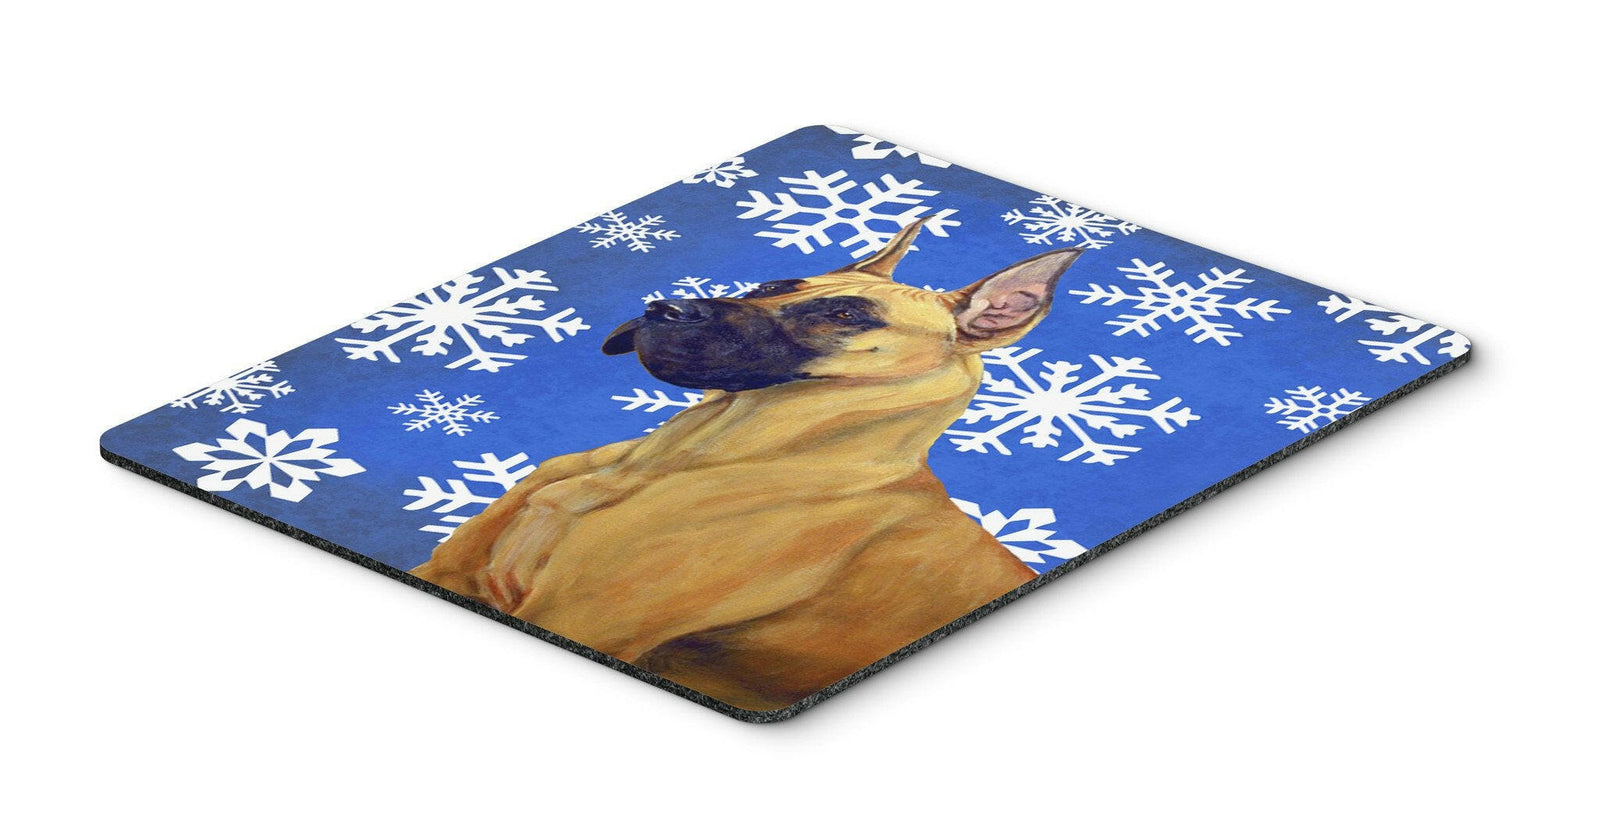 Great Dane Winter Snowflakes Holiday Mouse Pad, Hot Pad or Trivet by Caroline's Treasures